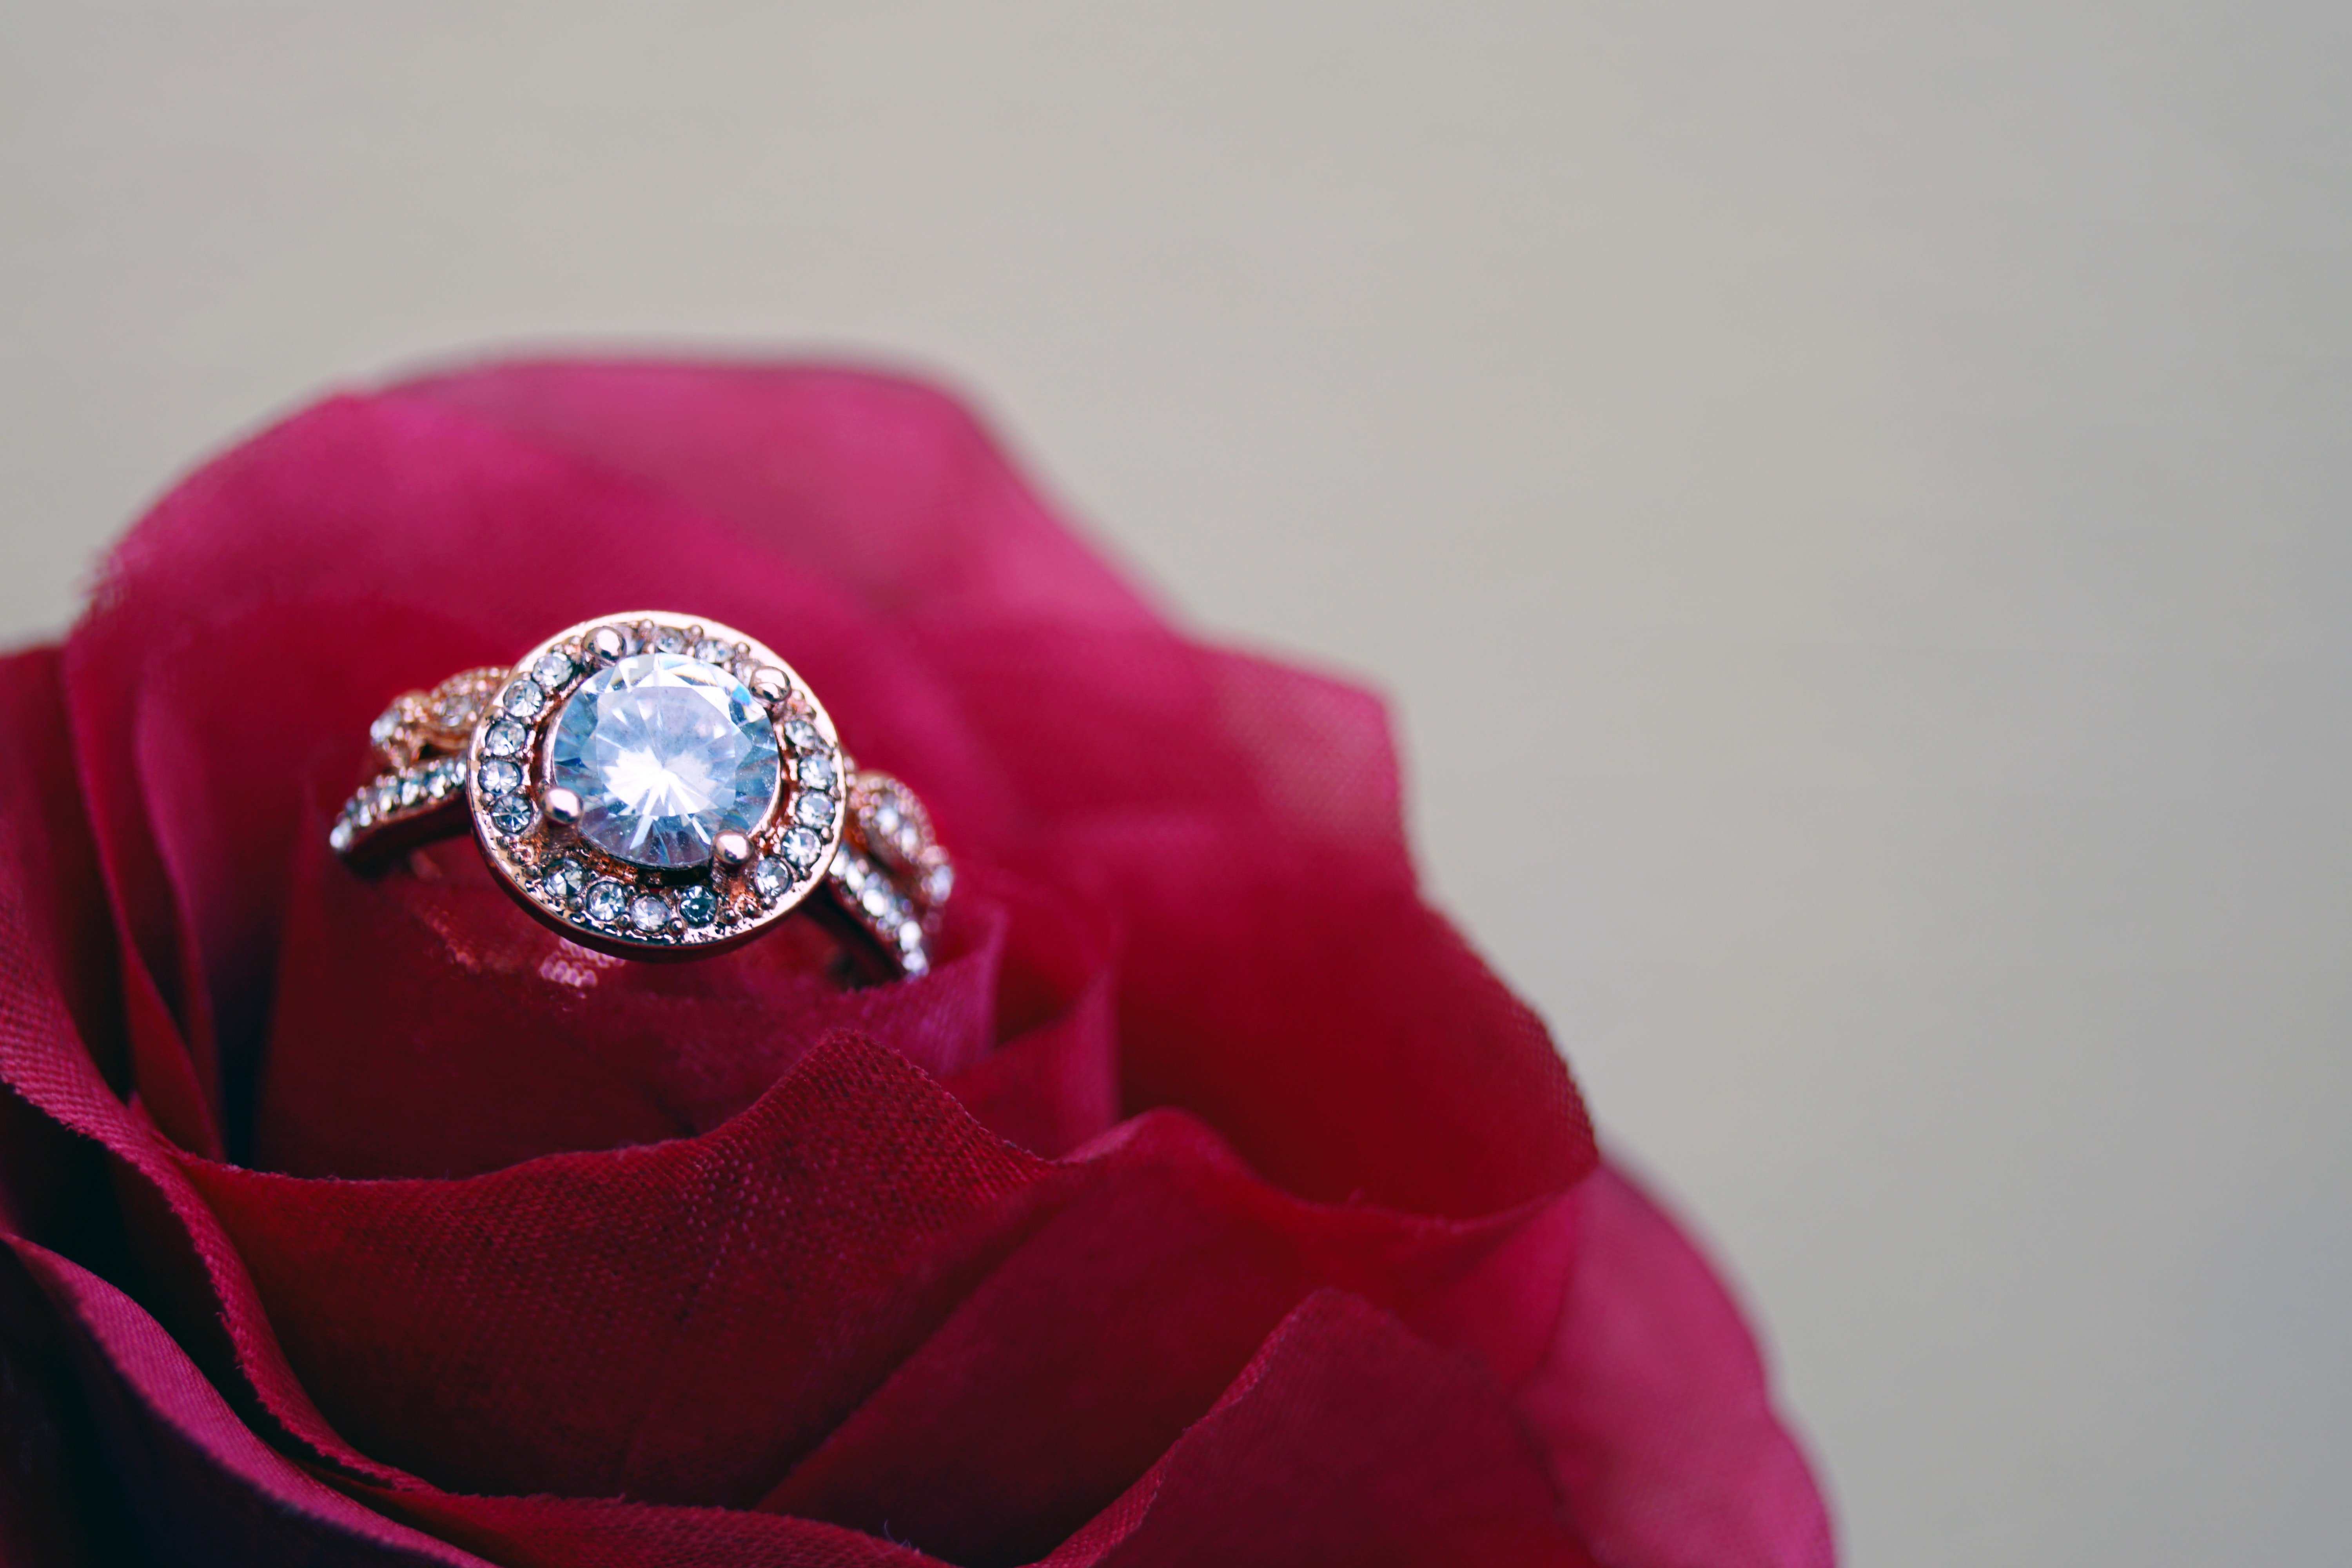 Levi inherited the family heirloom from Grandma Letty. | Source: Pexels